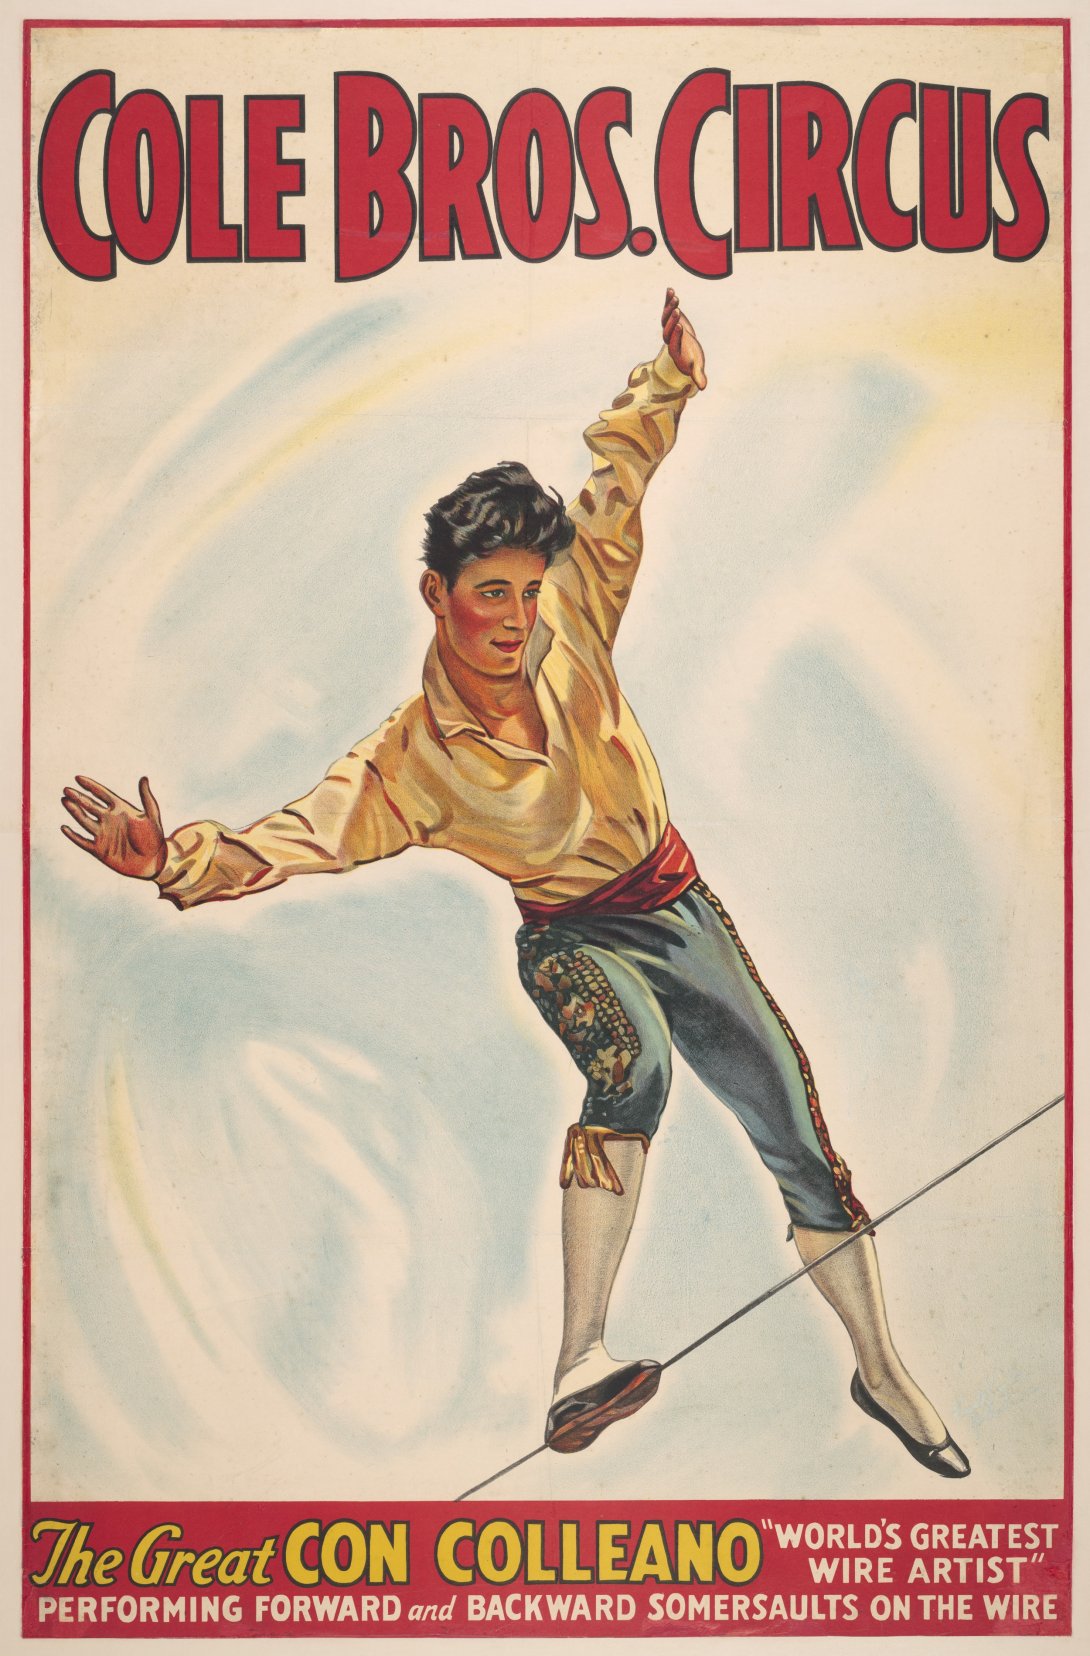 Poster for Cole Bros. Circus featuring a young performer in long white socks walking across a tightrope.